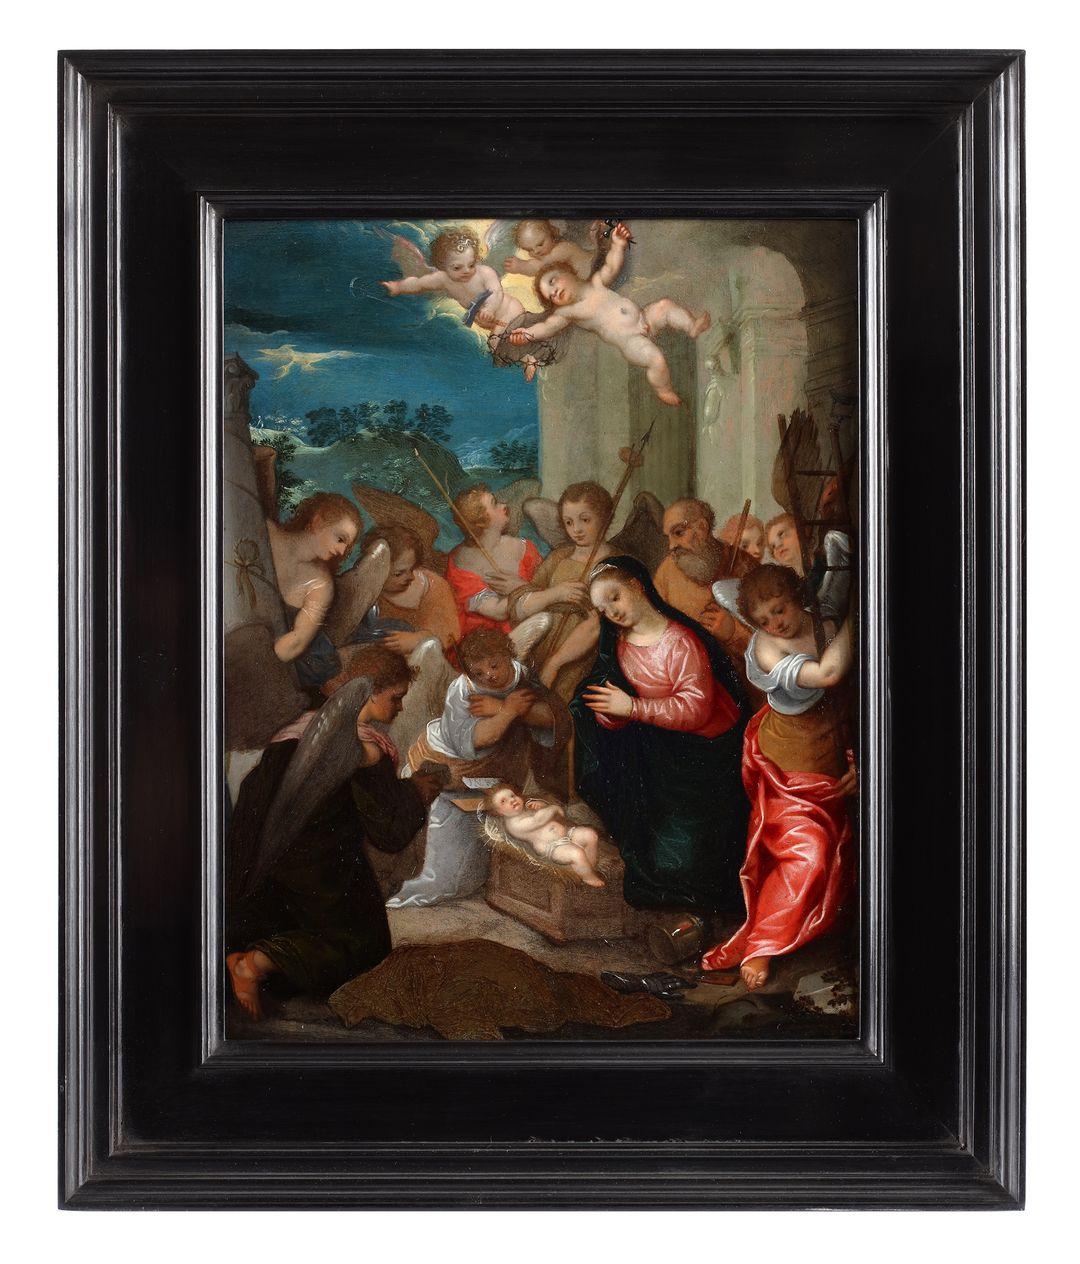 Adoration with angels and putti - Attr. to Johann König (1586-1642) For Sale 1